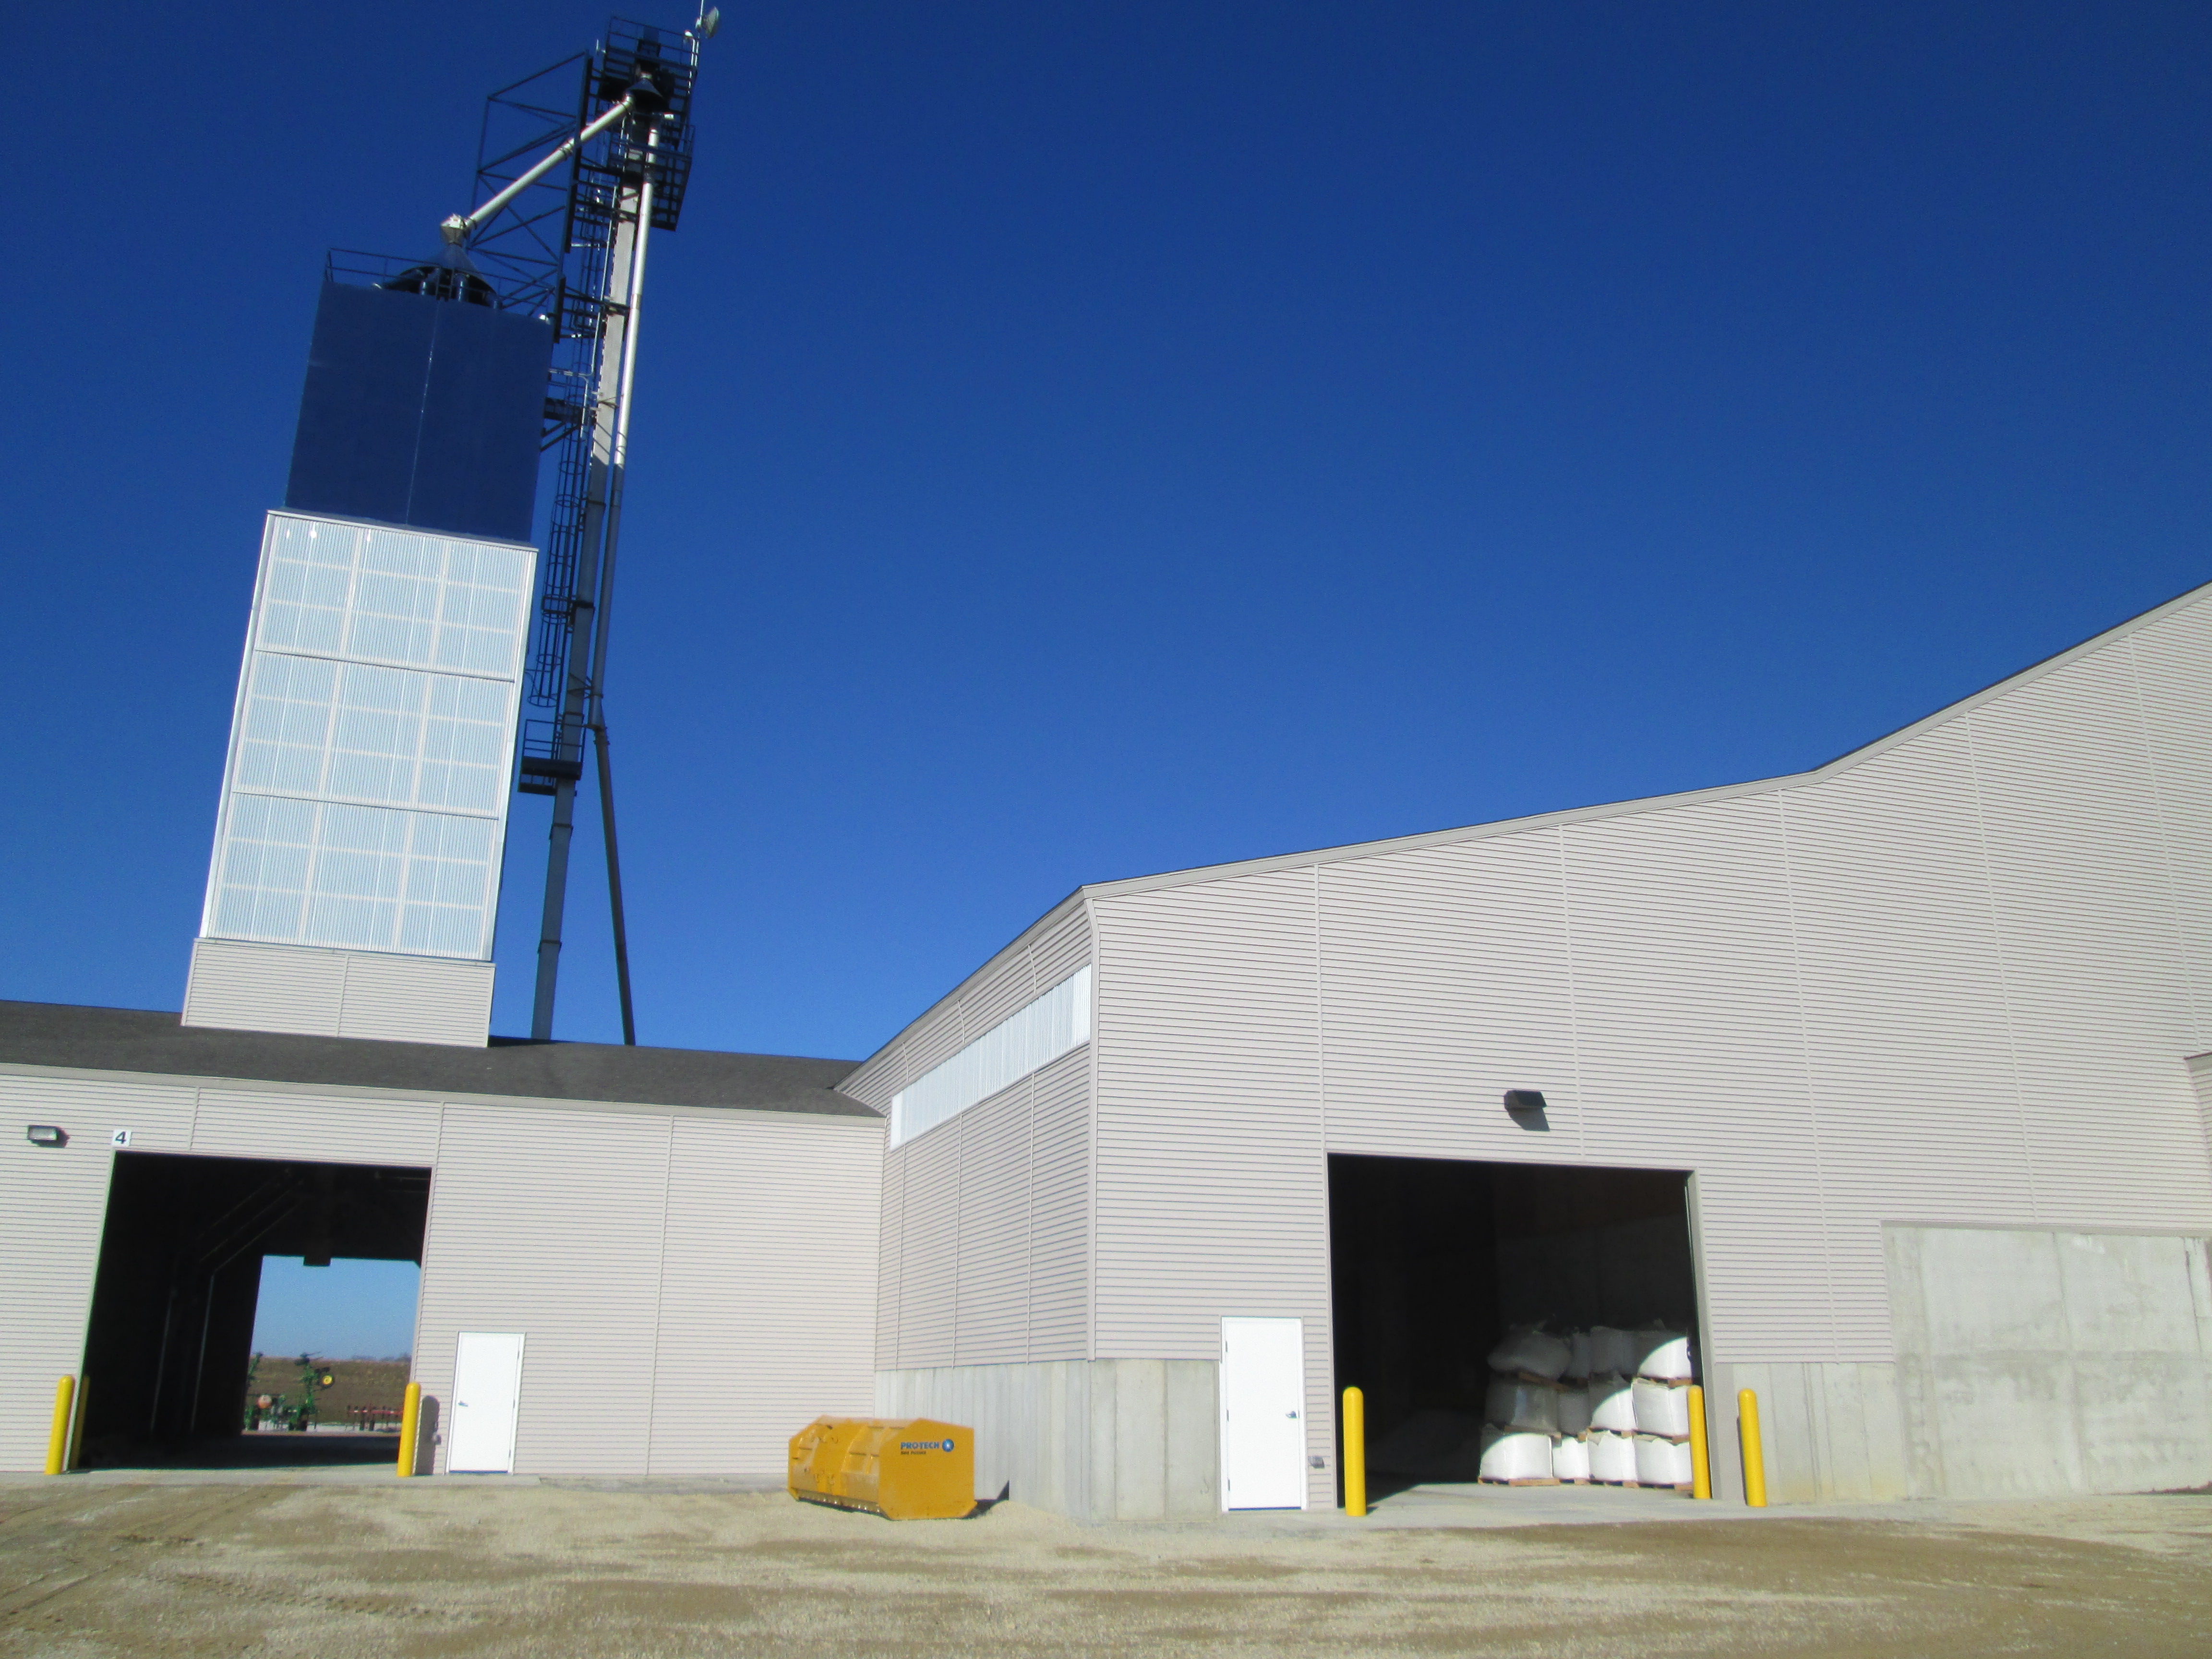 Newly constructed dry bulk fertilizer facility with load out tower.